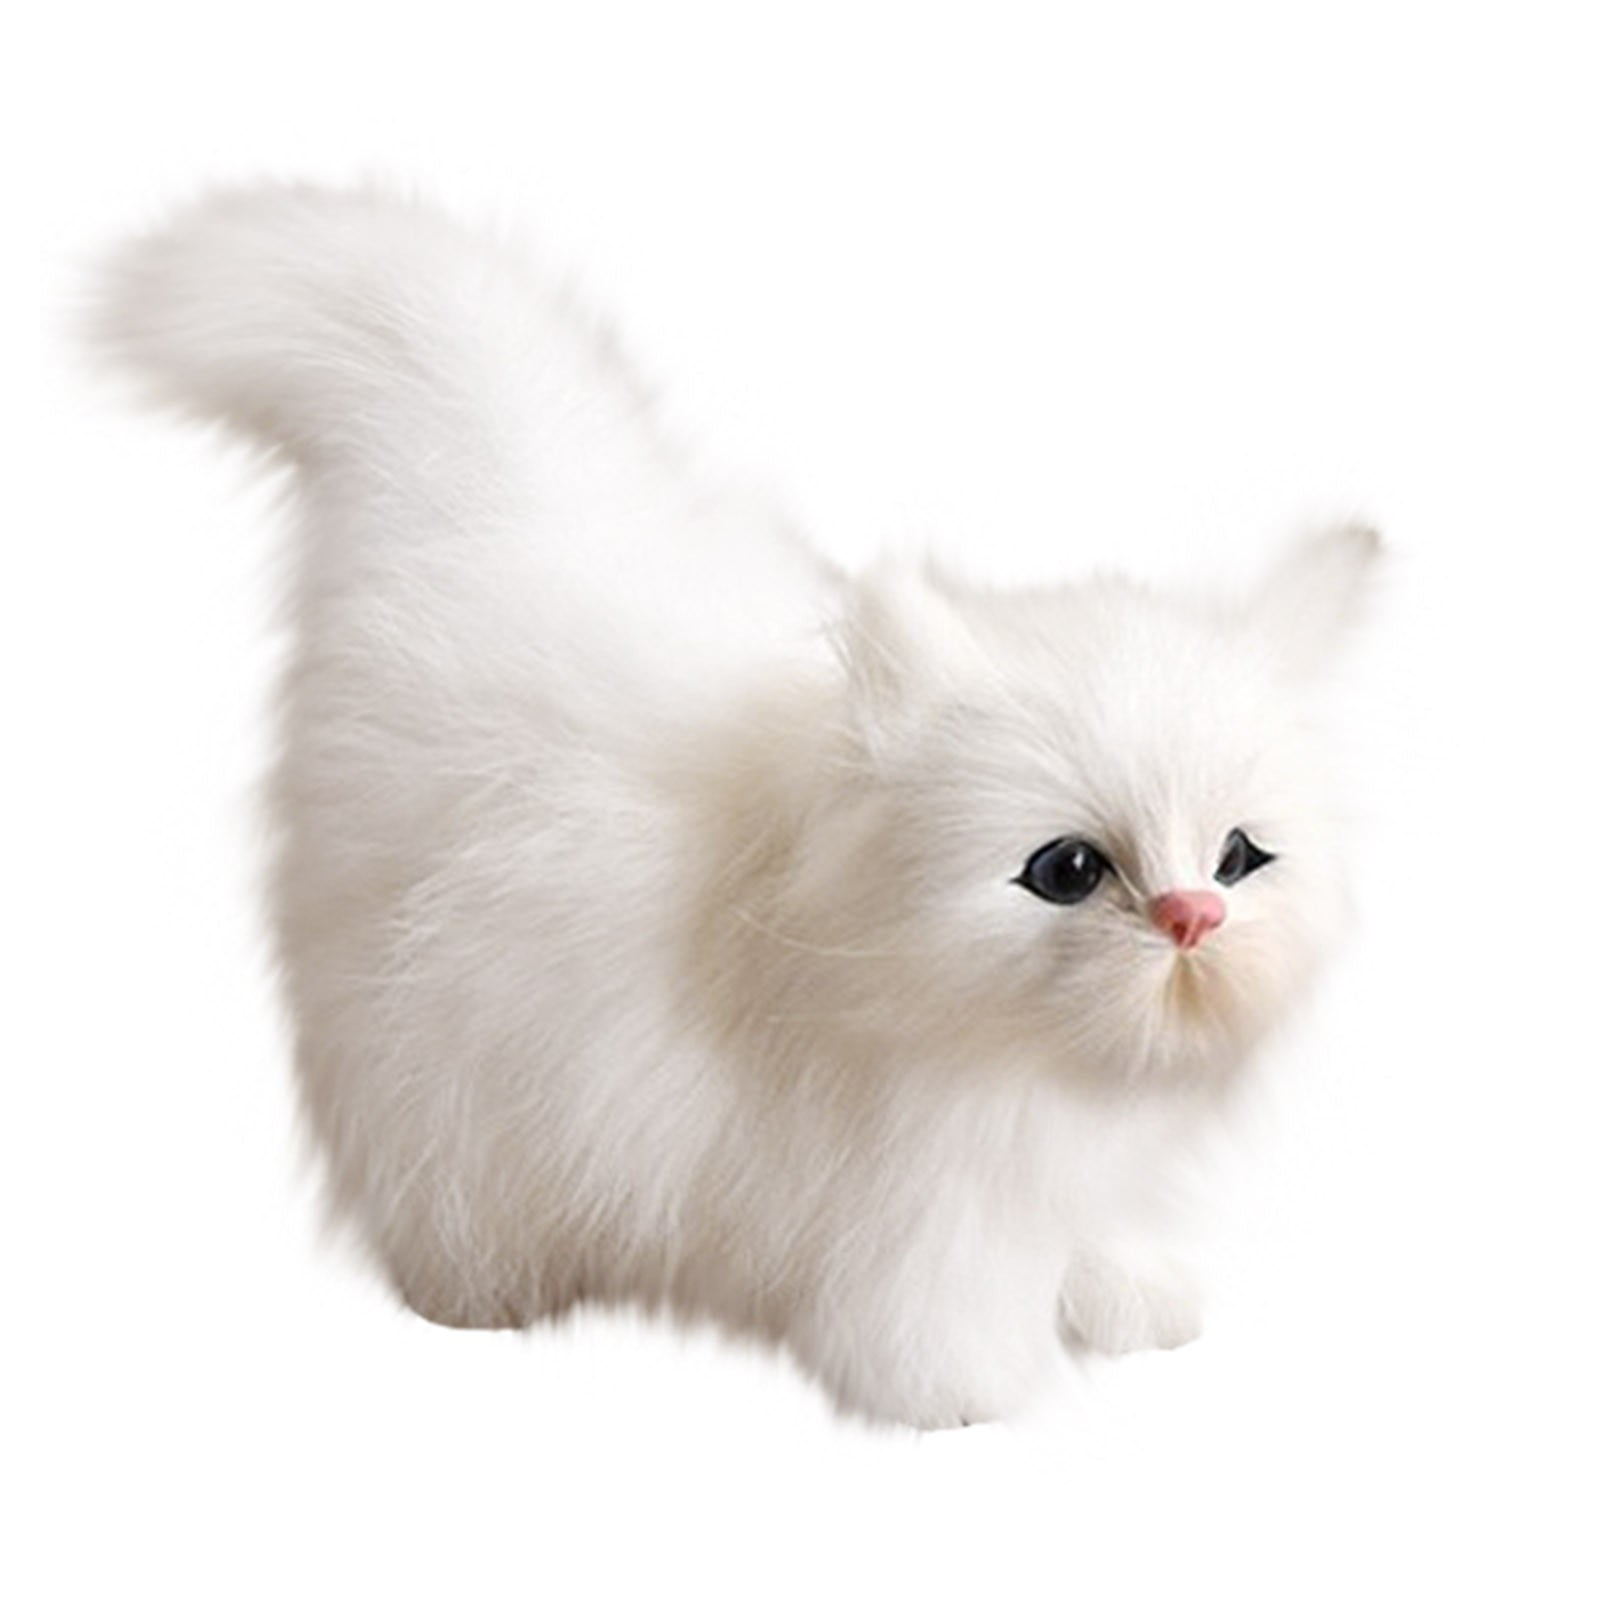 Lifelike Realistic Persian Cat Plush Toy Stand Animals Models Decor Doll Cute